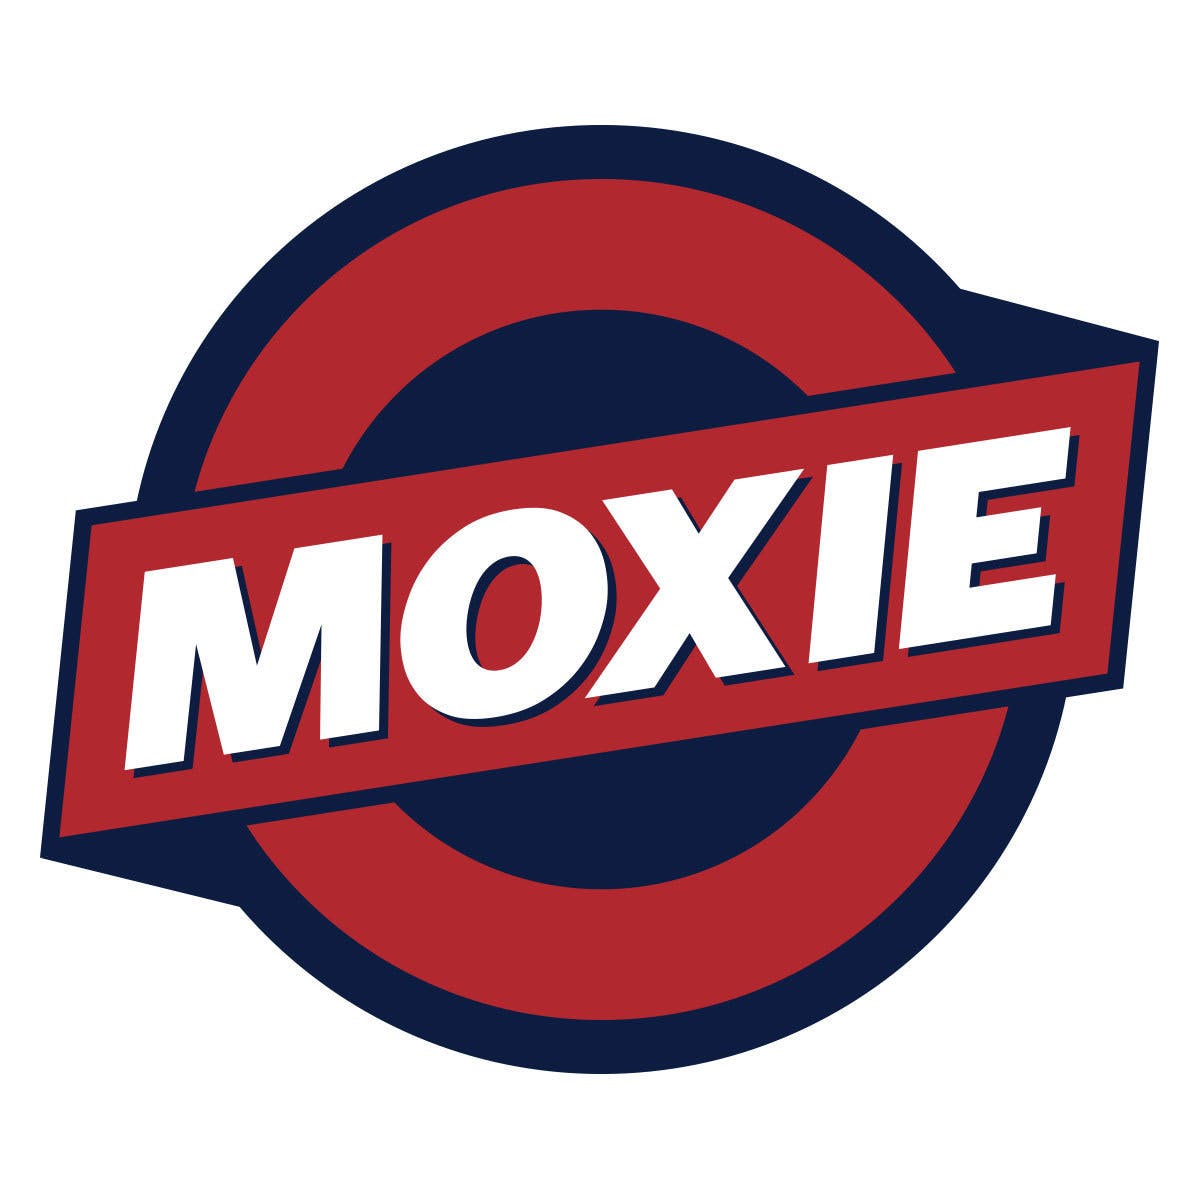 Moxie Logo - Moxie. Featured Products & Details